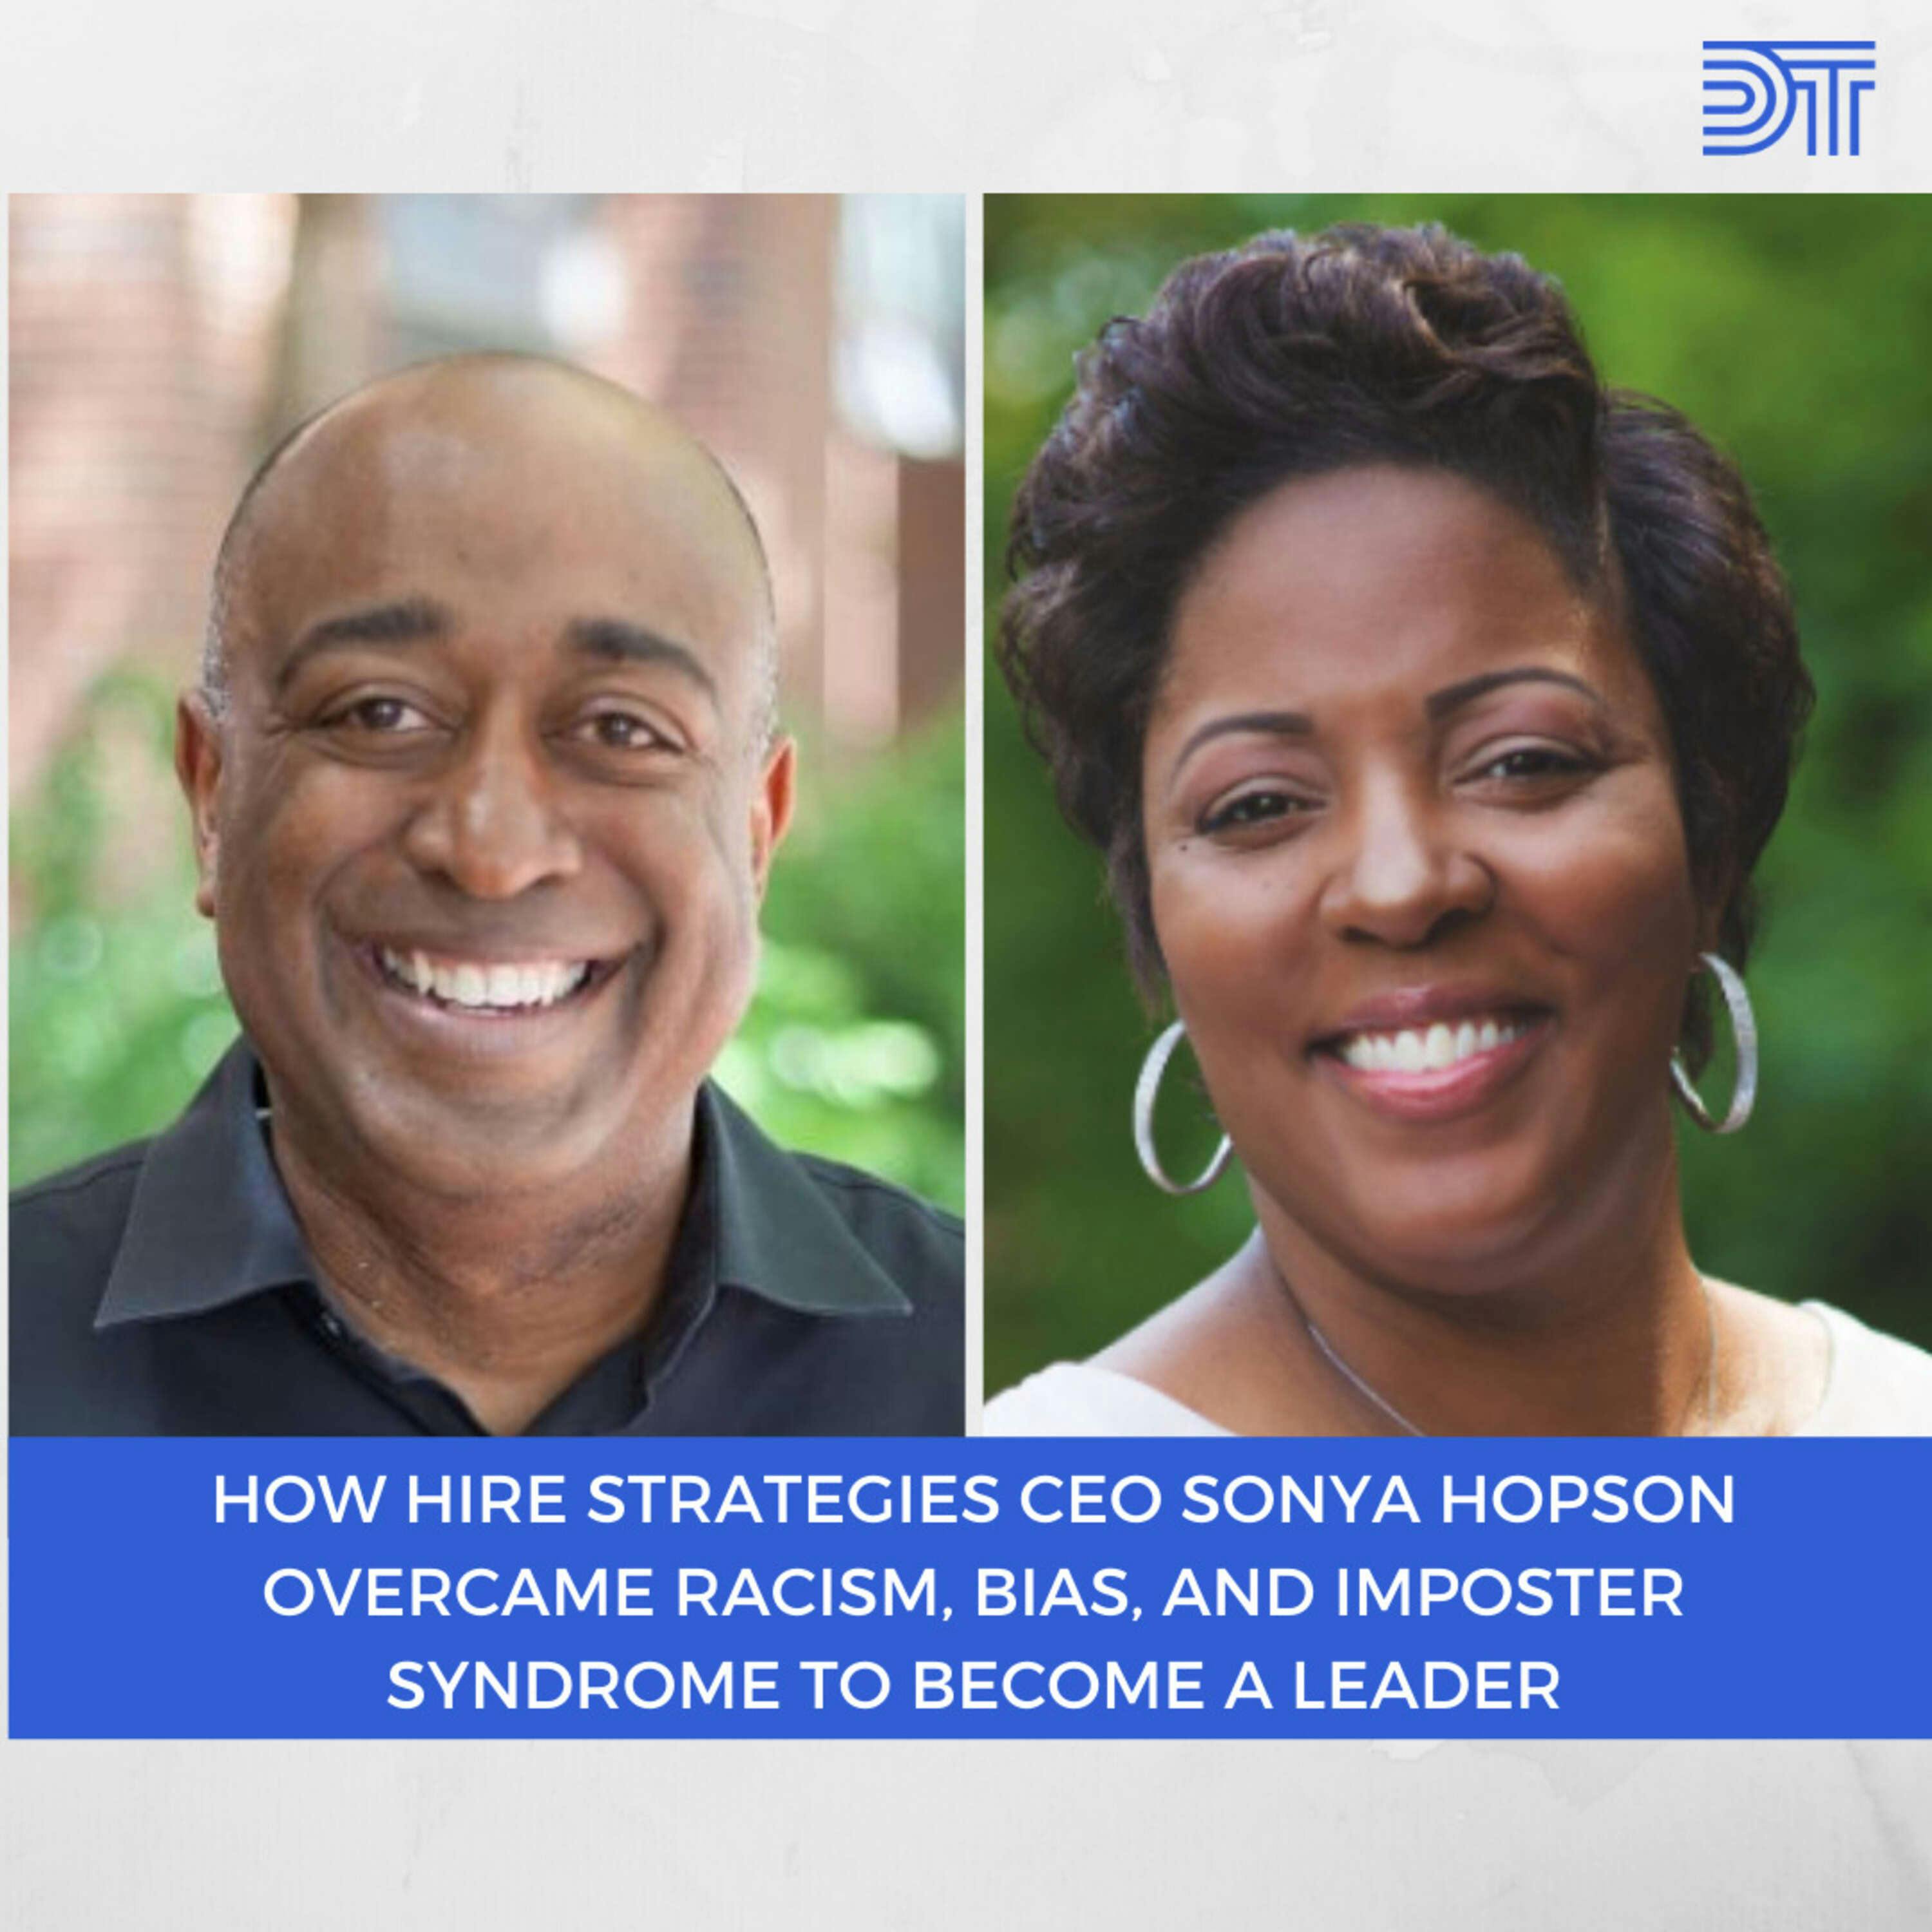 HIRE Strategies CEO Sonya Hopson on Overcoming Racism, Mistakes, Imposter Syndrome, and Bias to Grow as a Leader